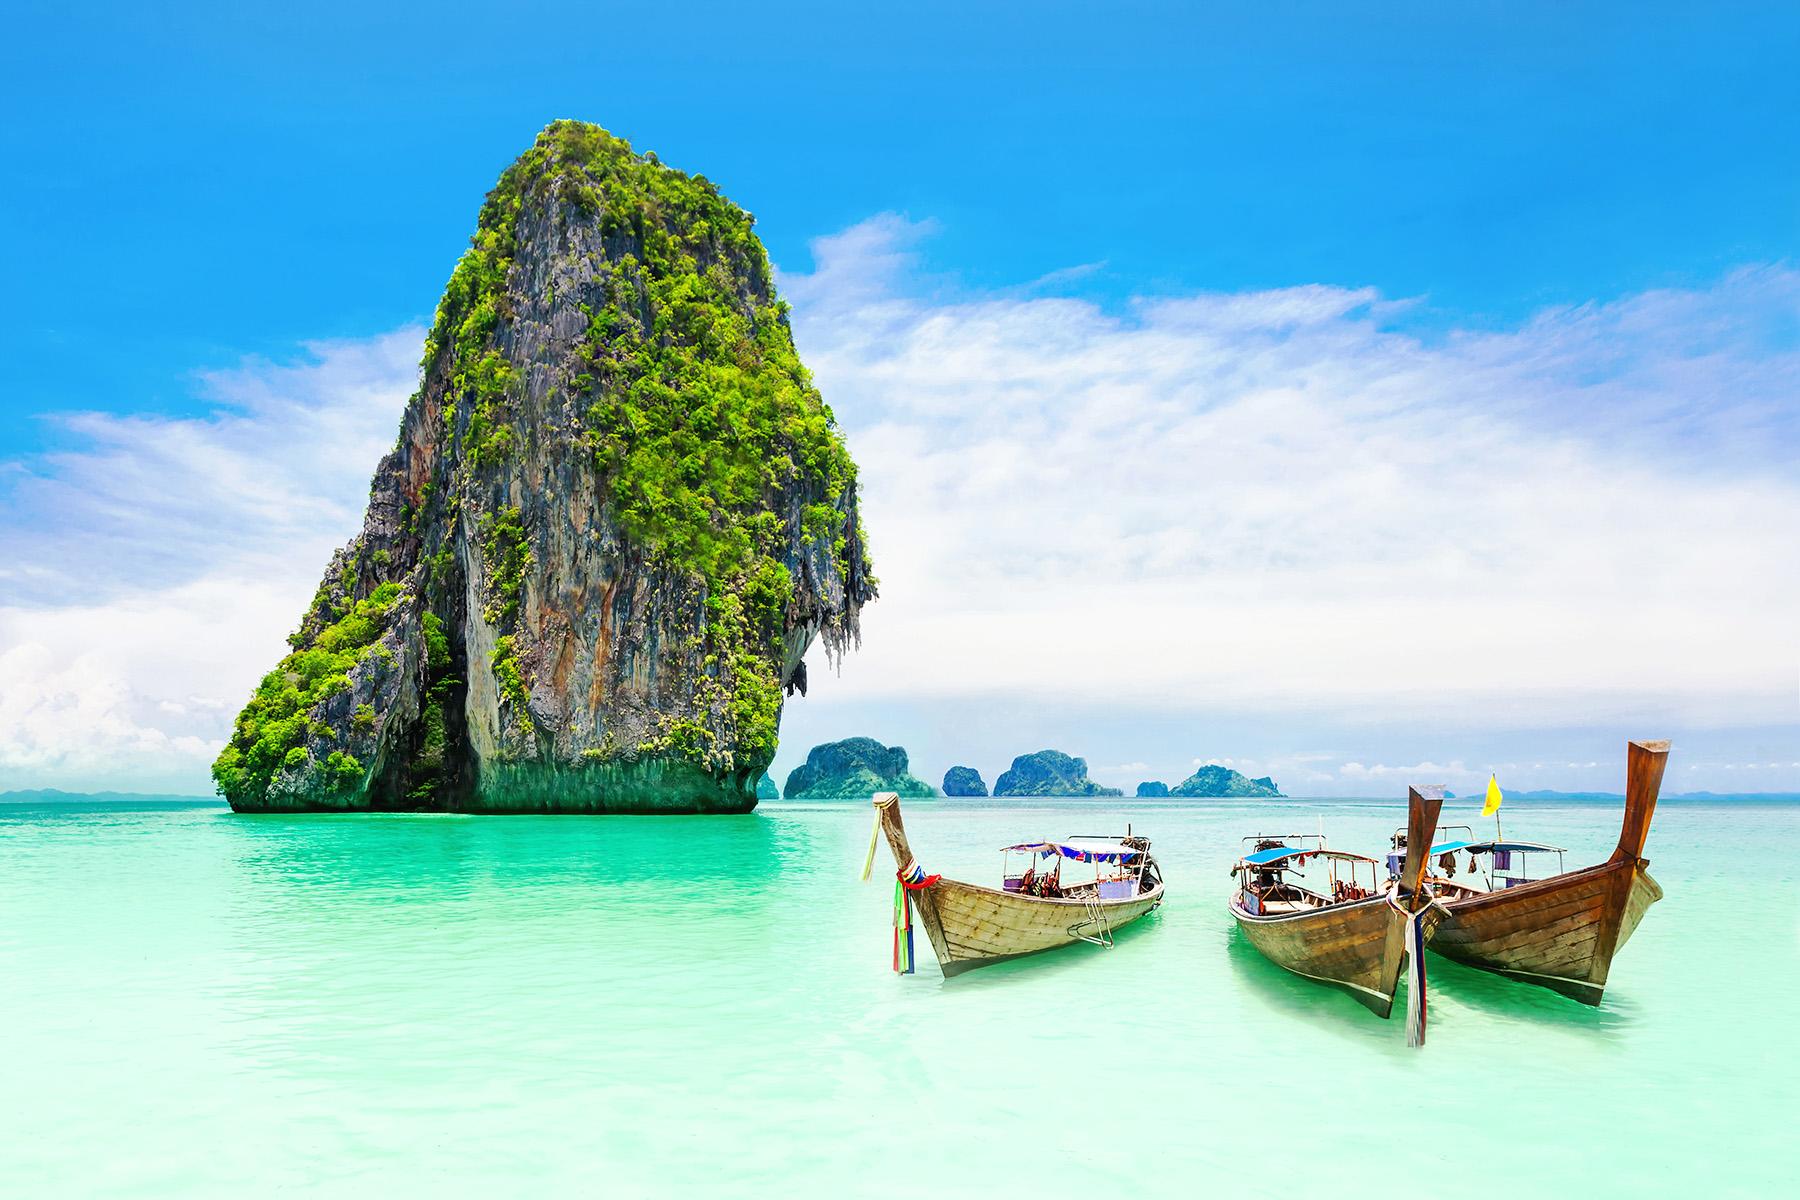 Thailand reopening to international tourism may not happen this year